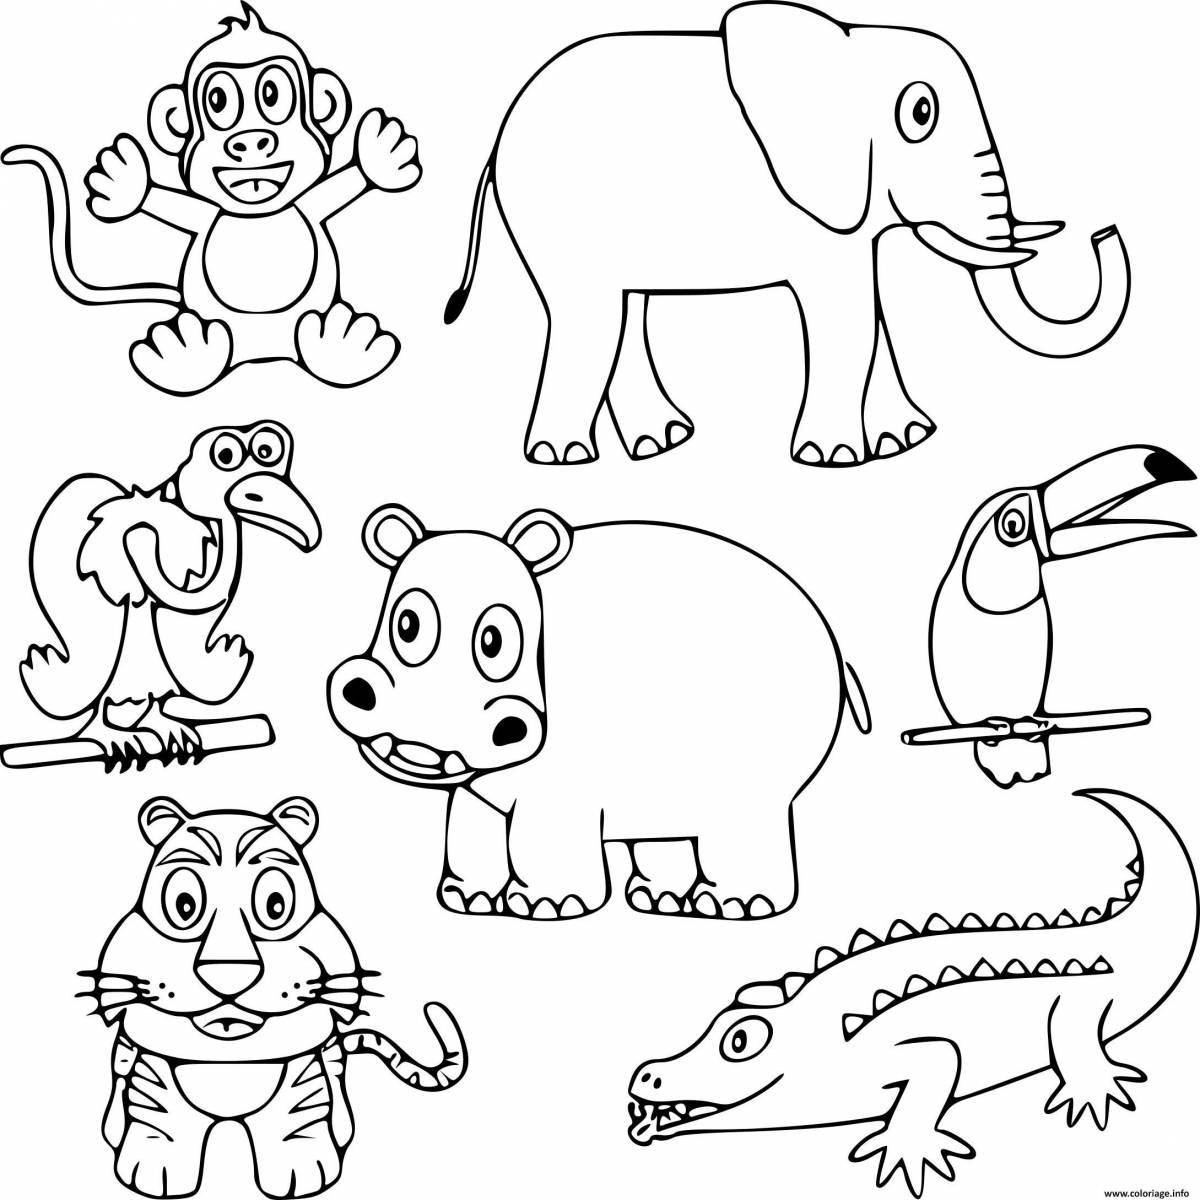 Fabulous mongoose coloring page